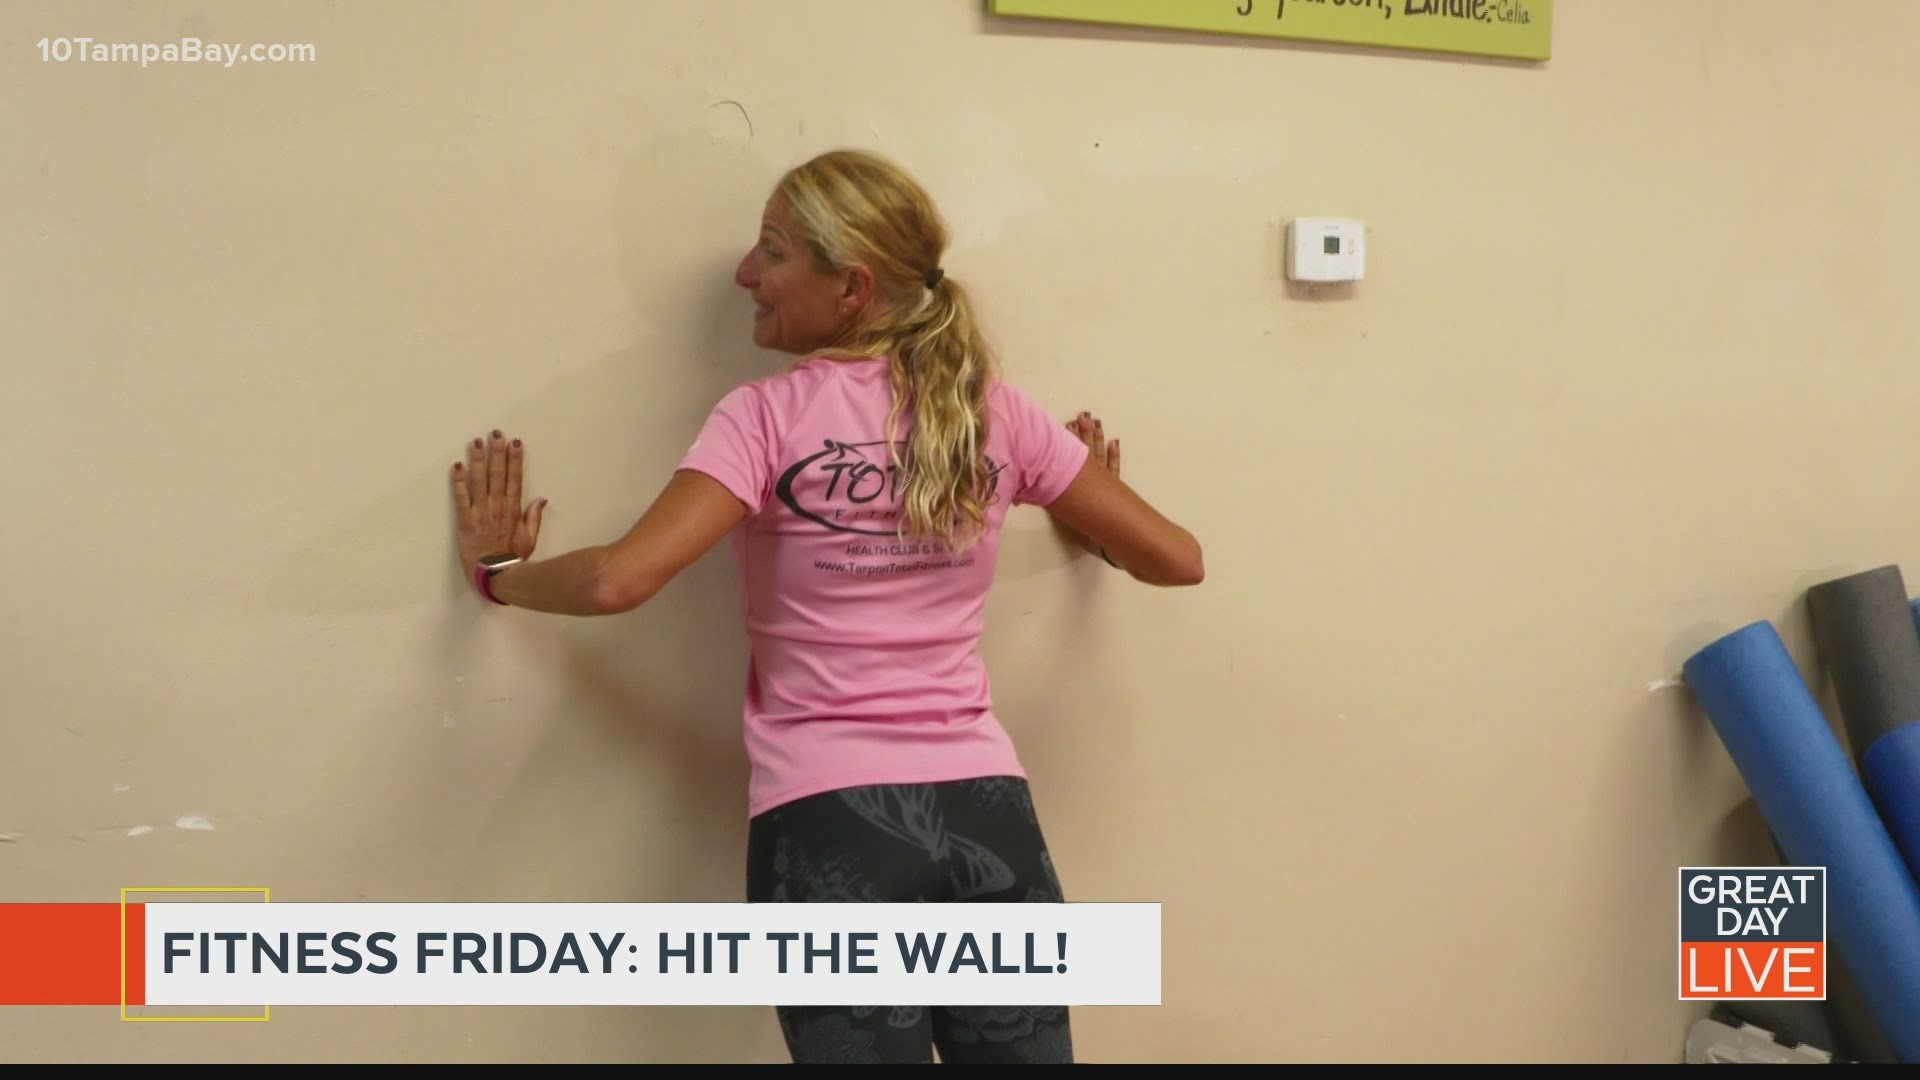 Fitness Friday: Hit the wall